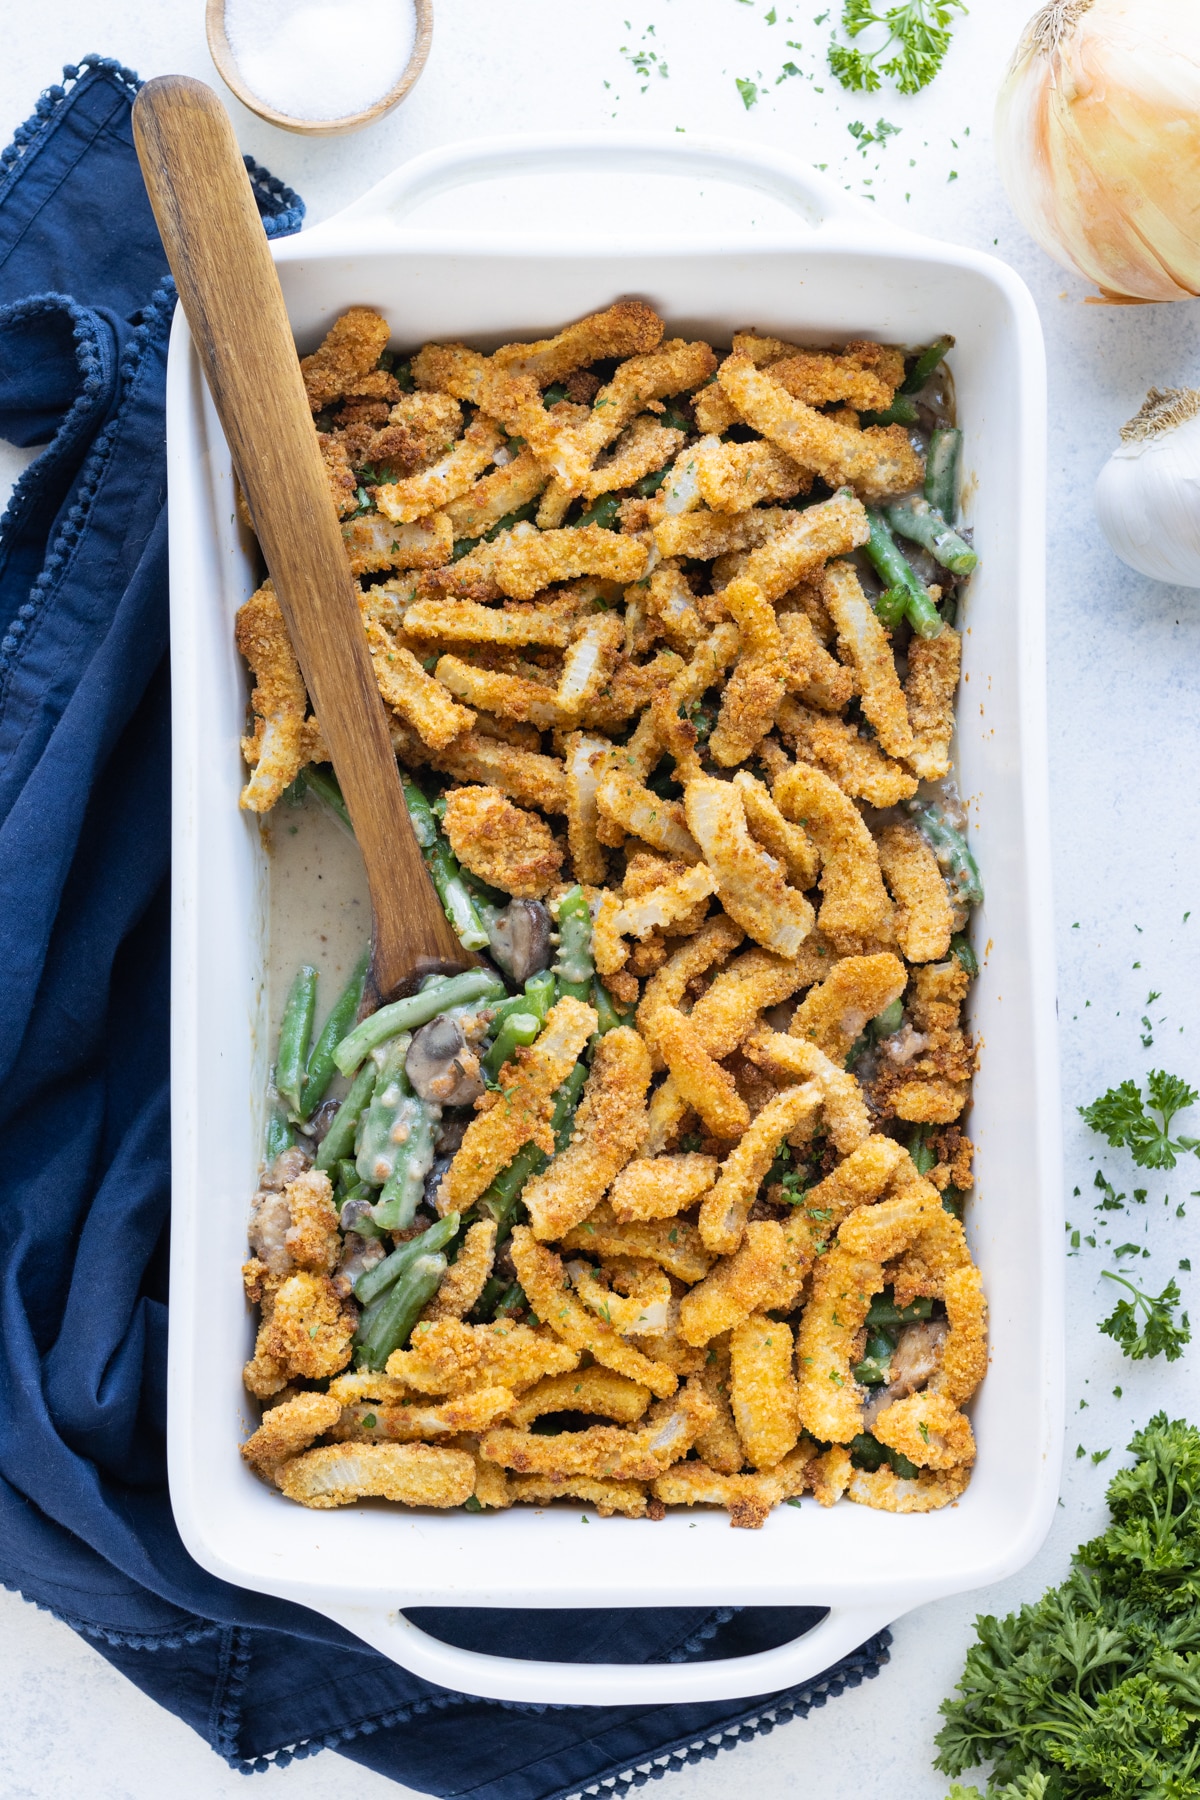 Green bean casserole from scratch is a delicious and healthy holiday side dish.